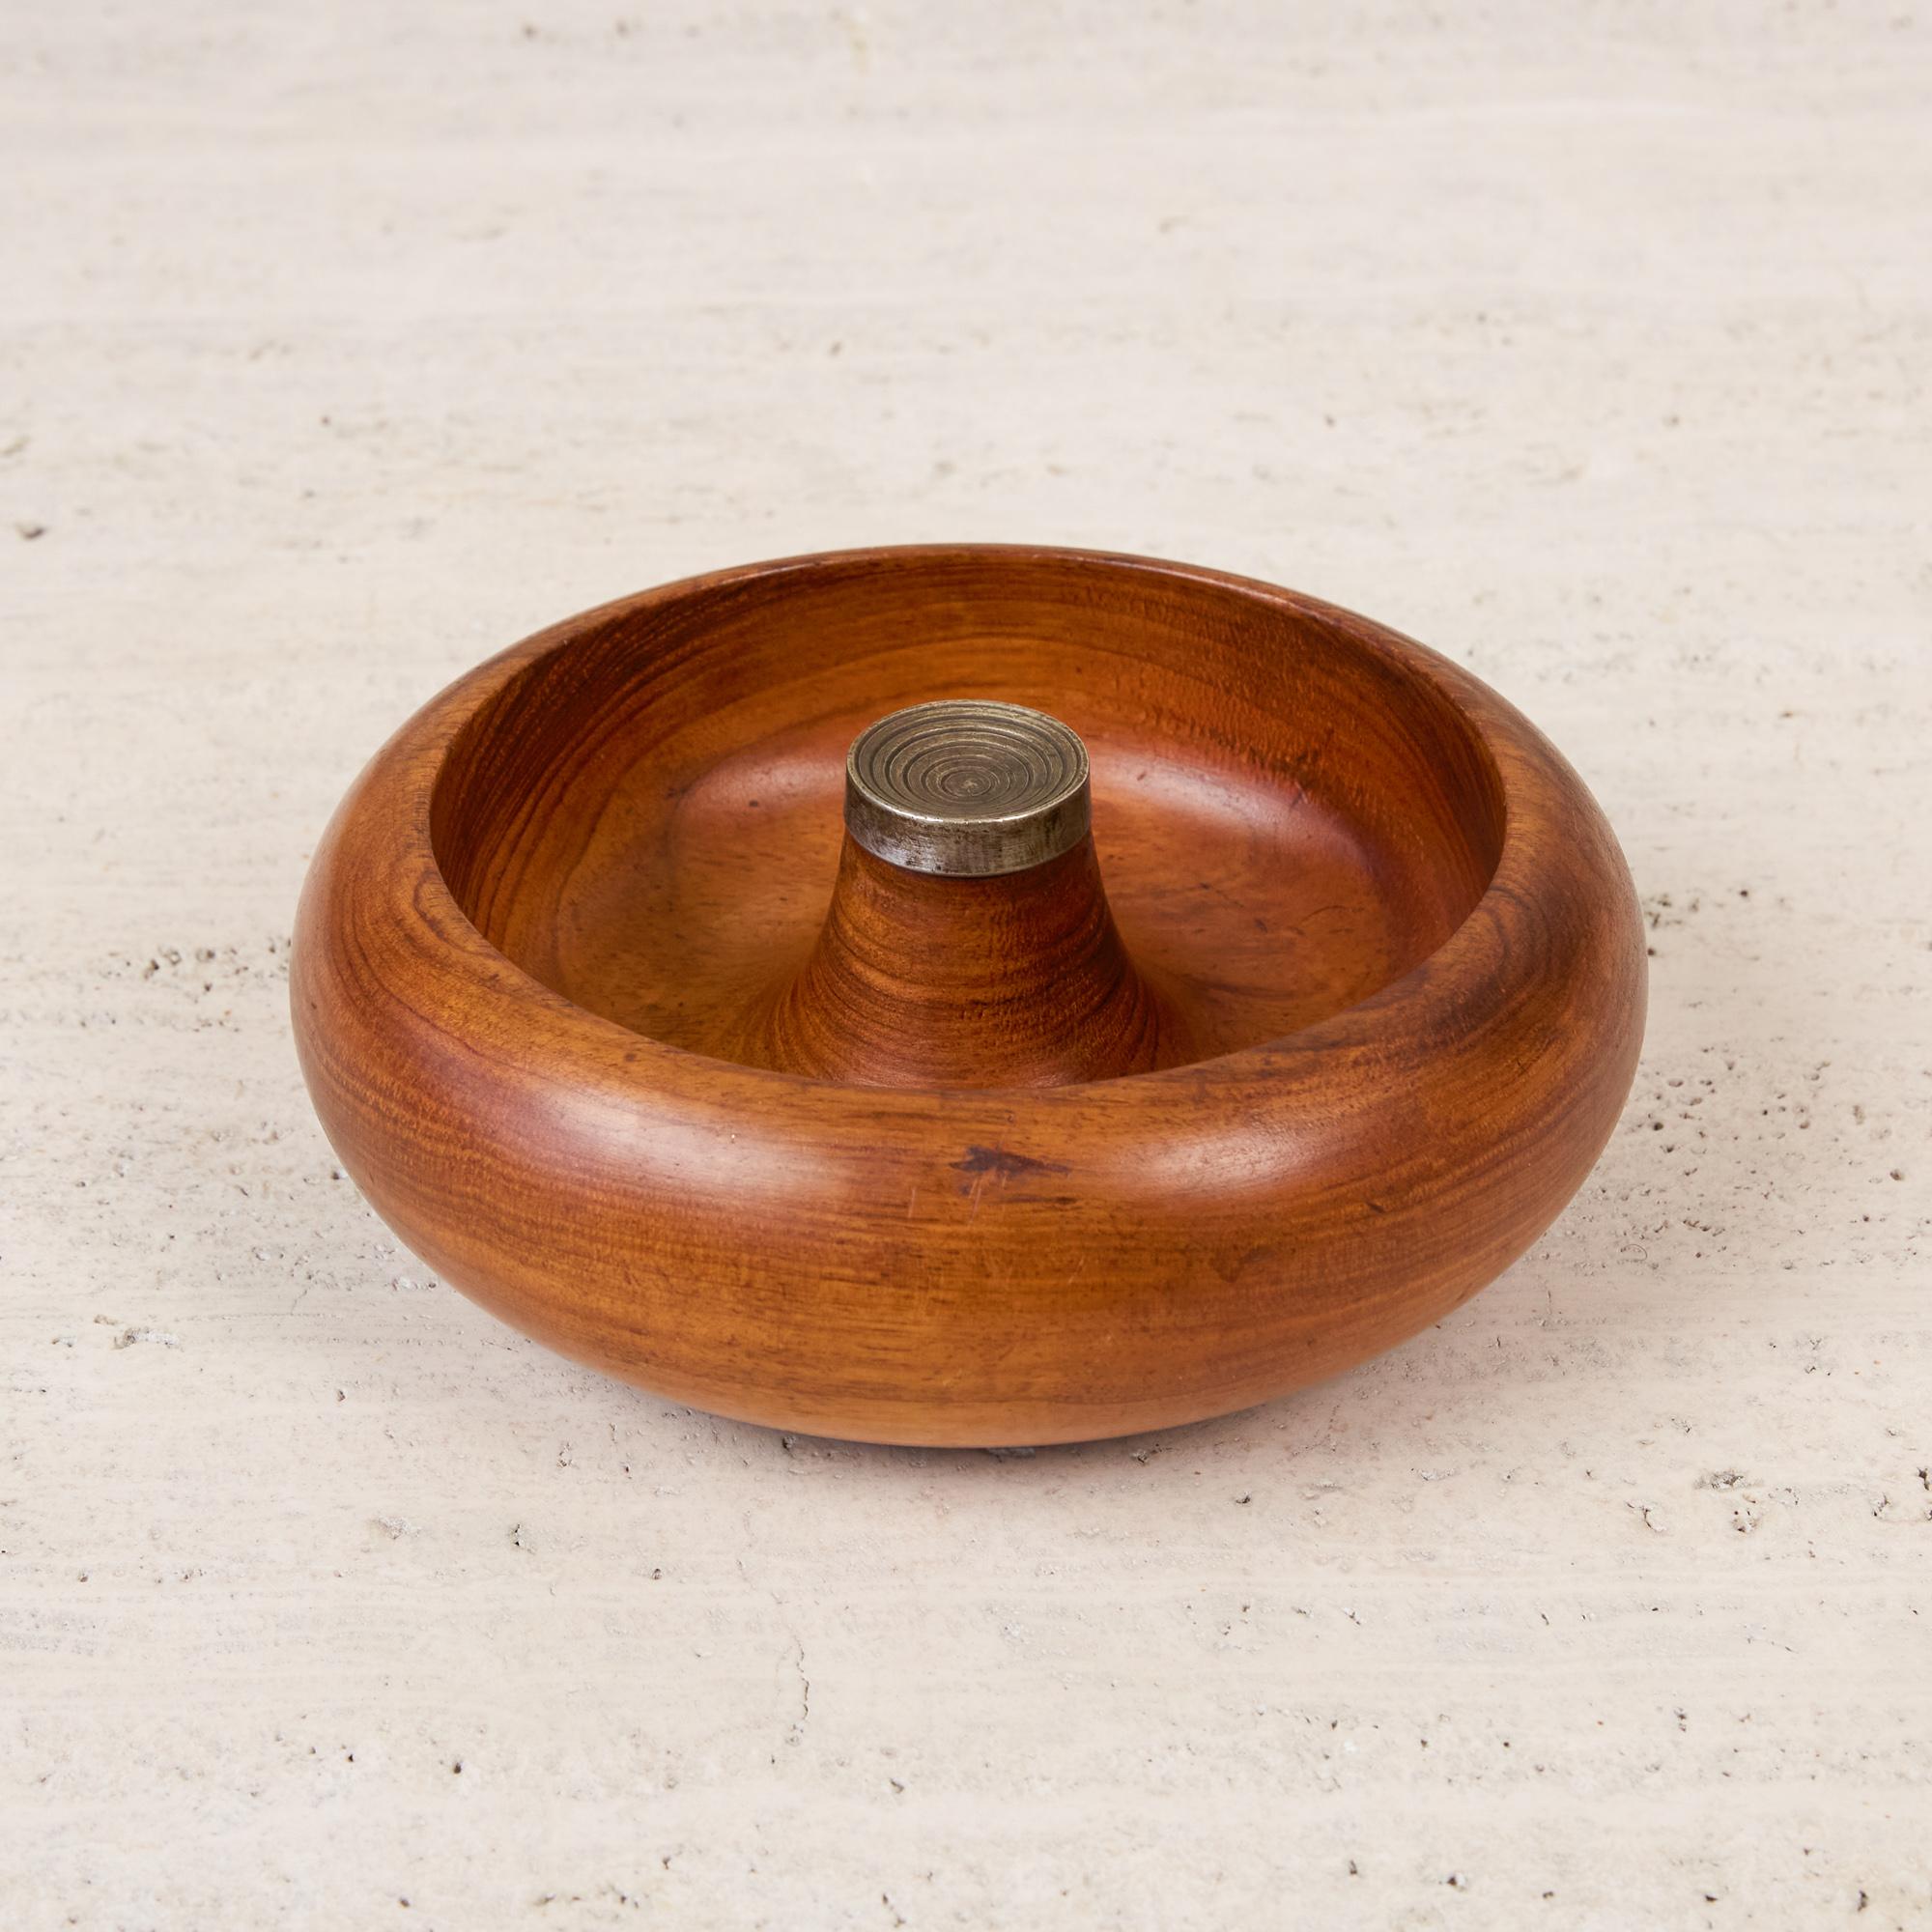 Walnut and brass nut bowl by Pelican of Australia. The bowl features a turned walnut body with brass center piece. The sculpted center section of the bowl forms upward and ends with the patinated brass cap with incensed grooves. These types of bowls